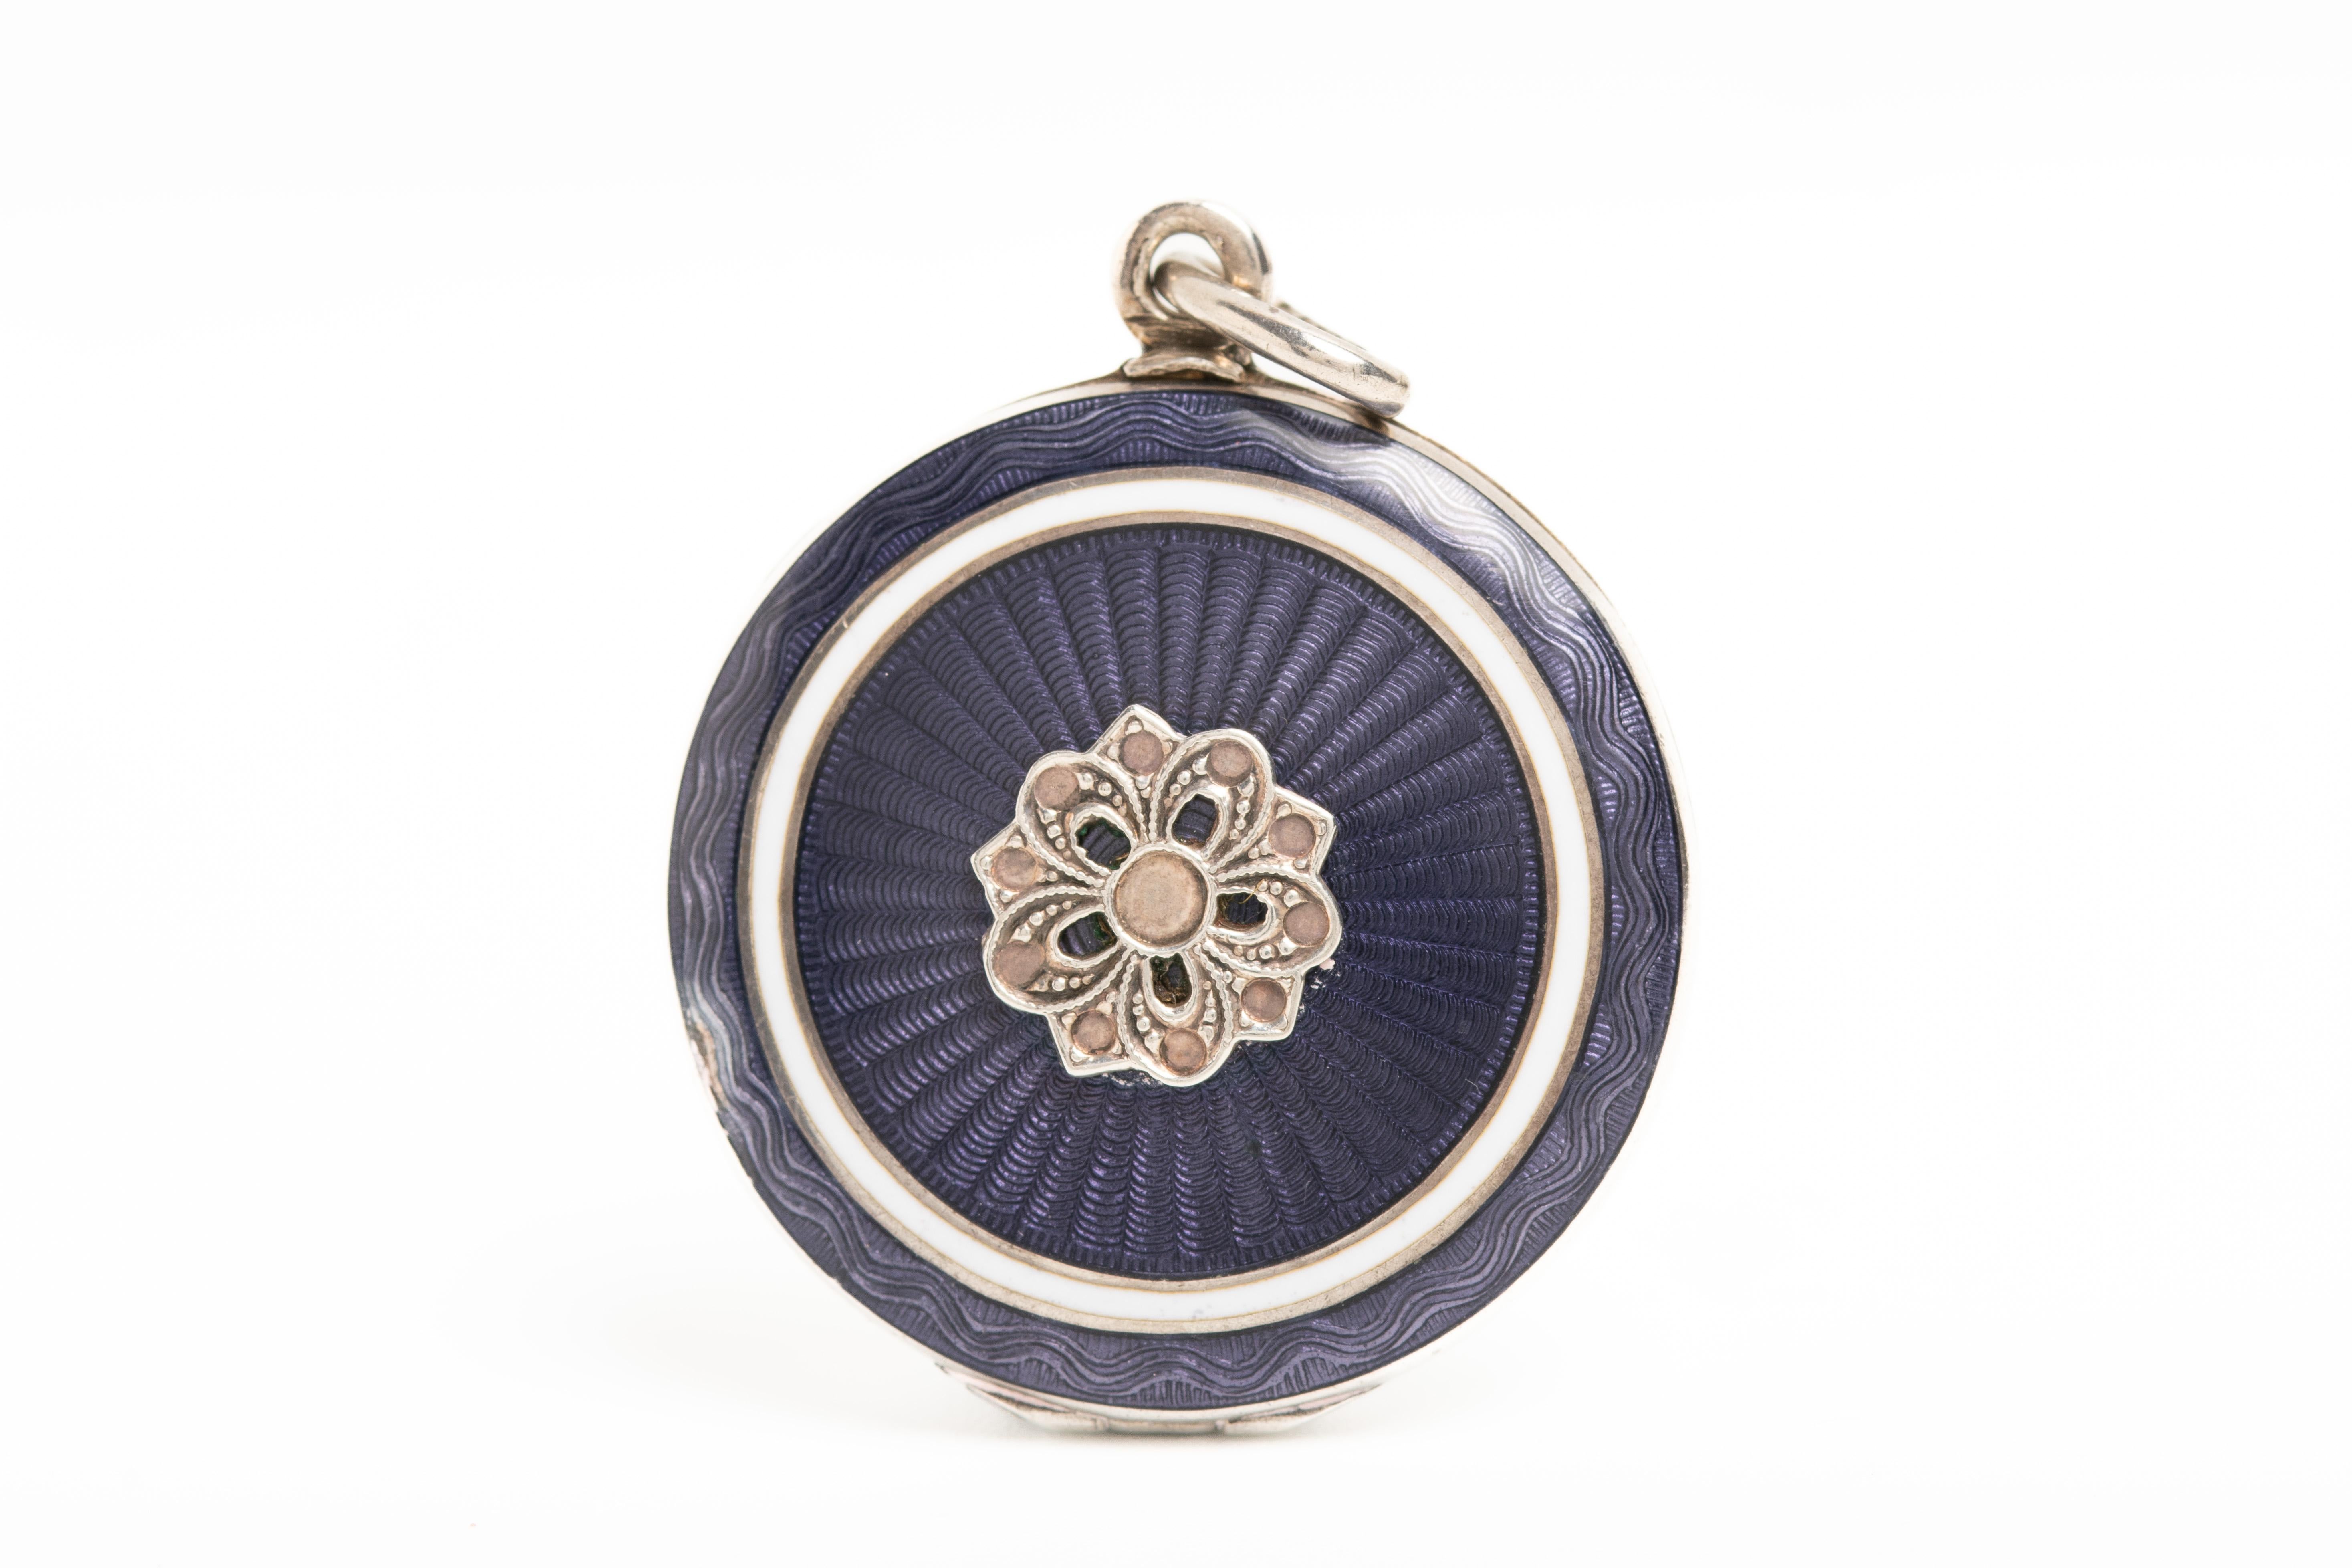 This antique purple guilloche enamel and silver locket comes from Austria and its beautifully decorated with a floral silver motif in the centre. The locket opens to reveal two compartments for the photographs. This Art Deco beauty is hallmarked 935